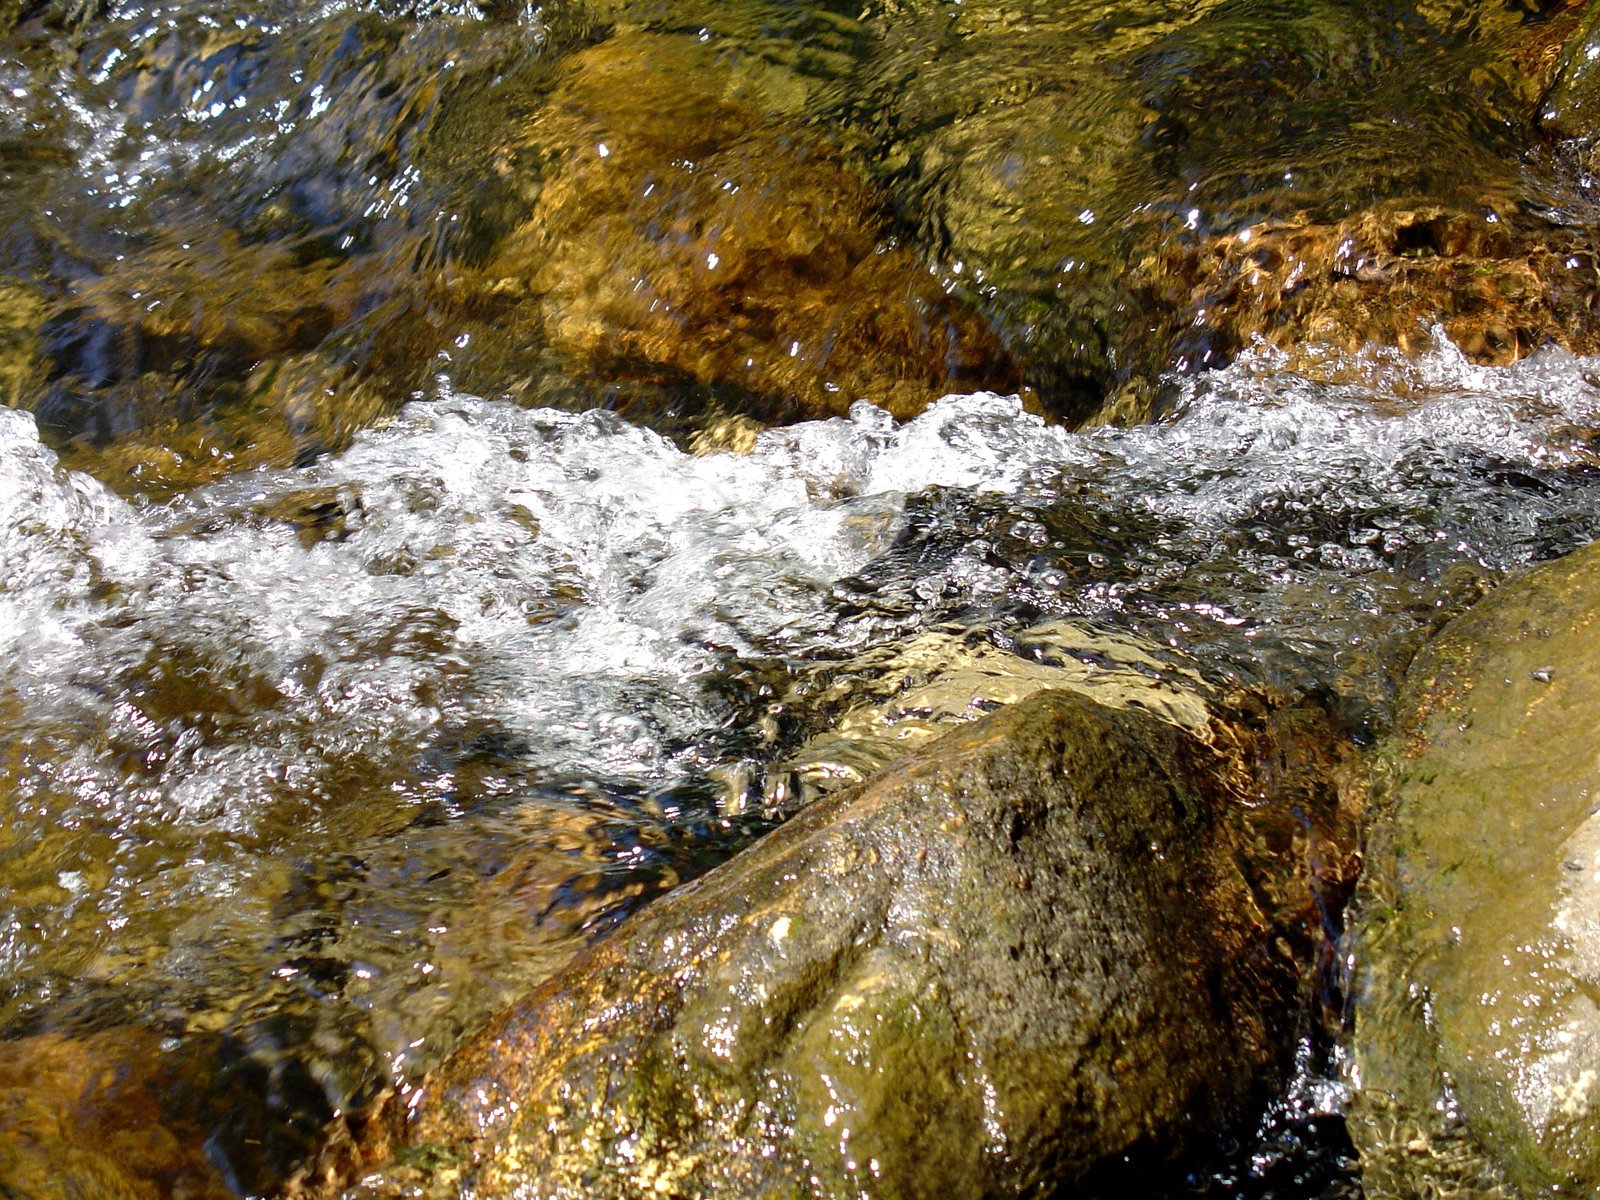 water pouring over a rock into a creek